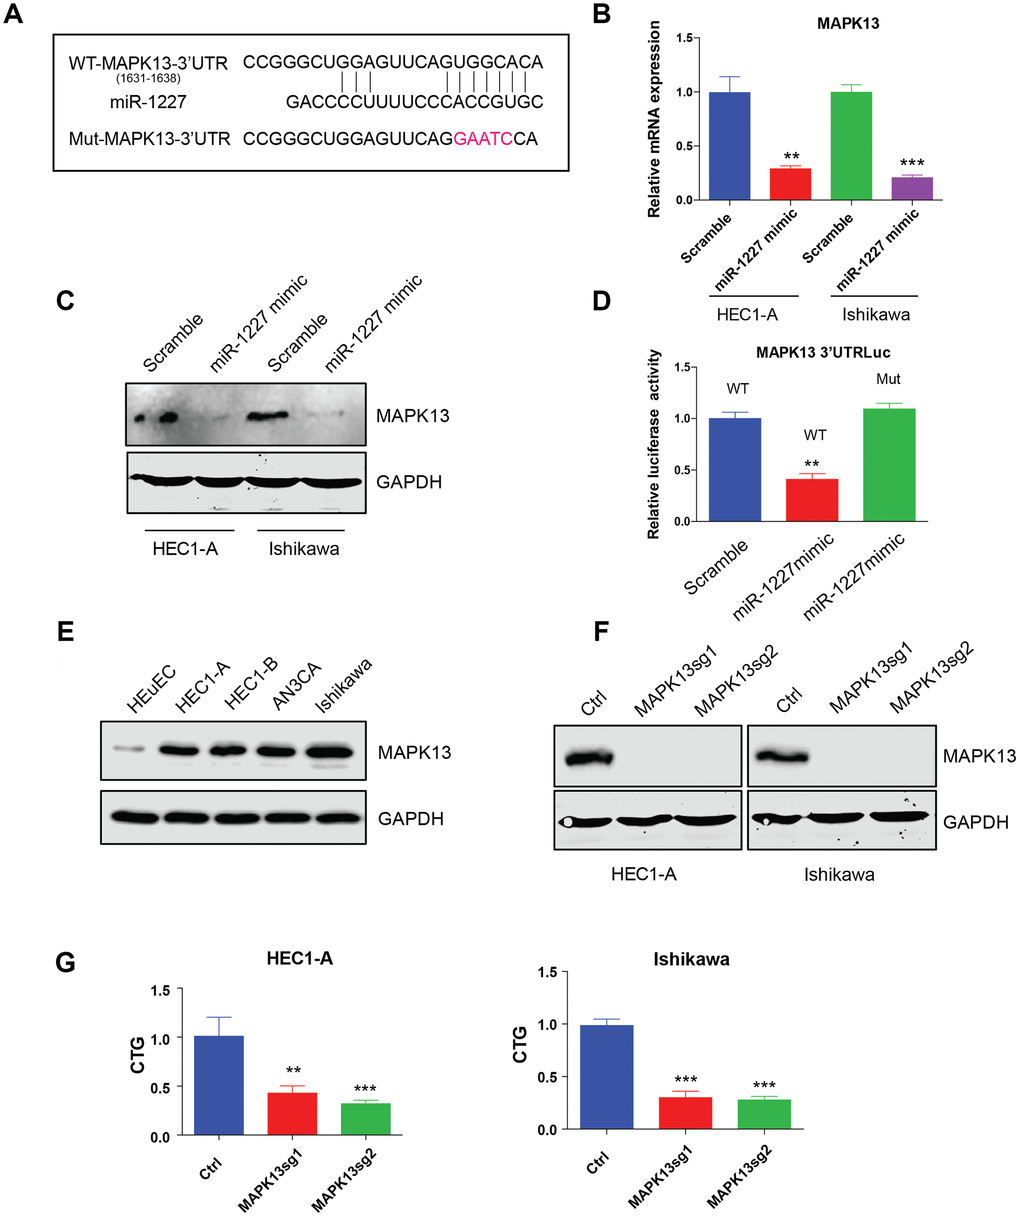 miR-1227 targets MAPK13 and inhibits EC cell proliferation. (A) Predicted MAPK13 3’UTR-miR-1227 interaction. Detection of MAPK13 mRNA transcription (B) and protein level (C) after overexpressing miR-1227 mimic in HEC1-A and Ishikawa cells. (D) Luciferase assay detects WT or miR-1227 binding sites mutated MAPK13 3’UTR activity in the presence or absence of miR-1227. (E) Western blot detects MAPK13 expression in EC cell lines and HEuEC. (F) Western blot results of MAPK13 after knocking down MAPK13 in HEC1-A and Ishikawa cells. GAPDH was used as internal control. (G) CellTiter-Glo detect cell viability after knocking down MAPK13 in HEC1-A and Ishikawa cells, cell viability was tested 5 days after transduction. *P